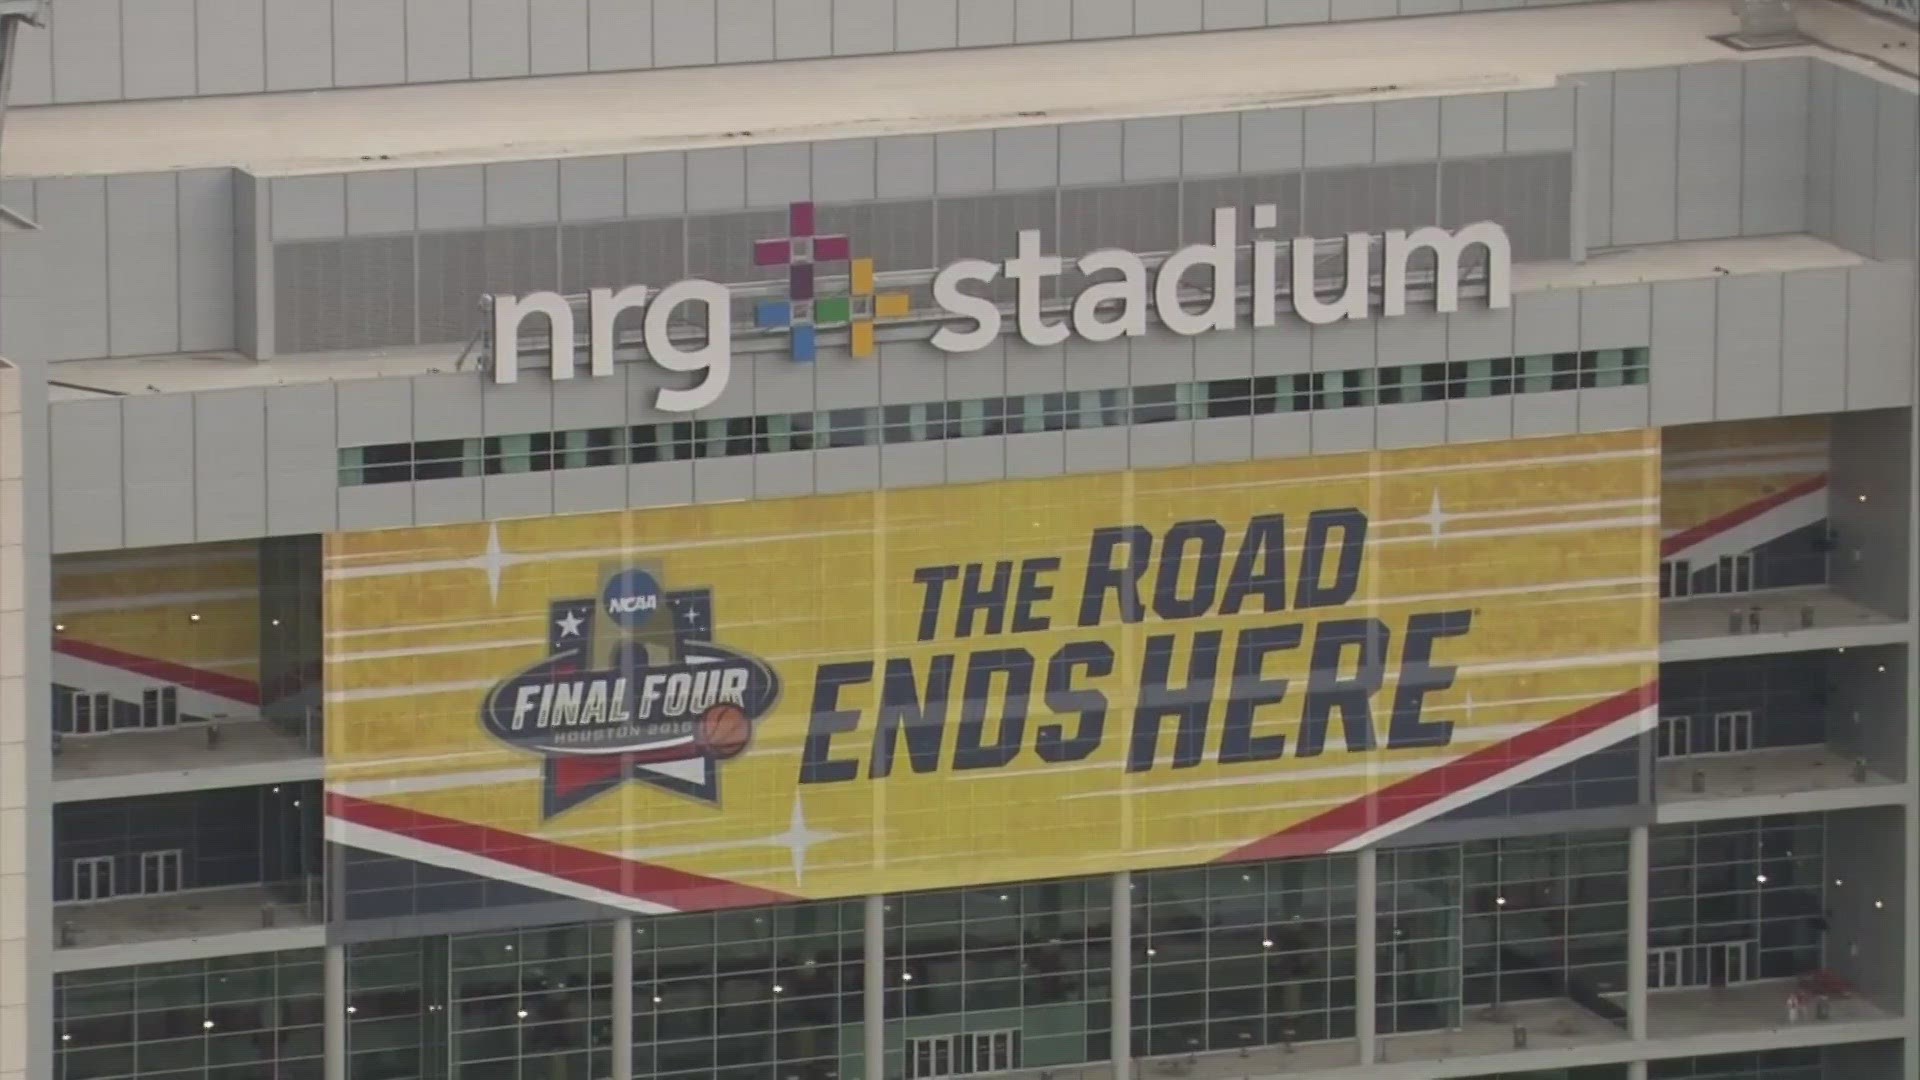 The Final Four is just one of the many events Houston is hosting this year that’s drawing thousands.